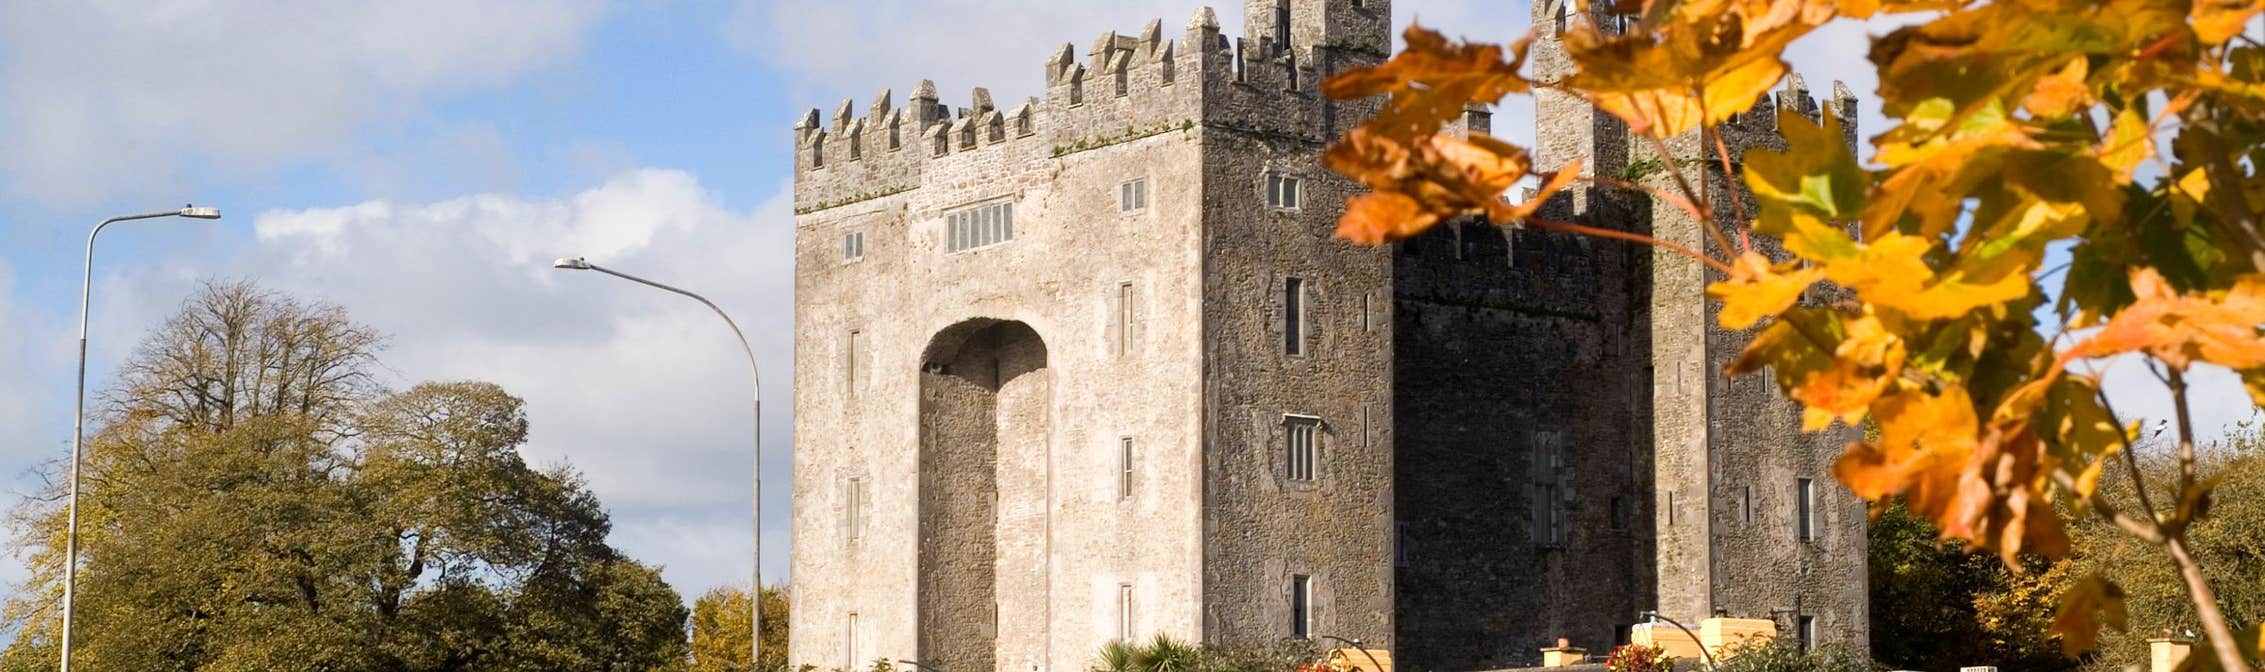 Image of Bunratty Castle in County Clare